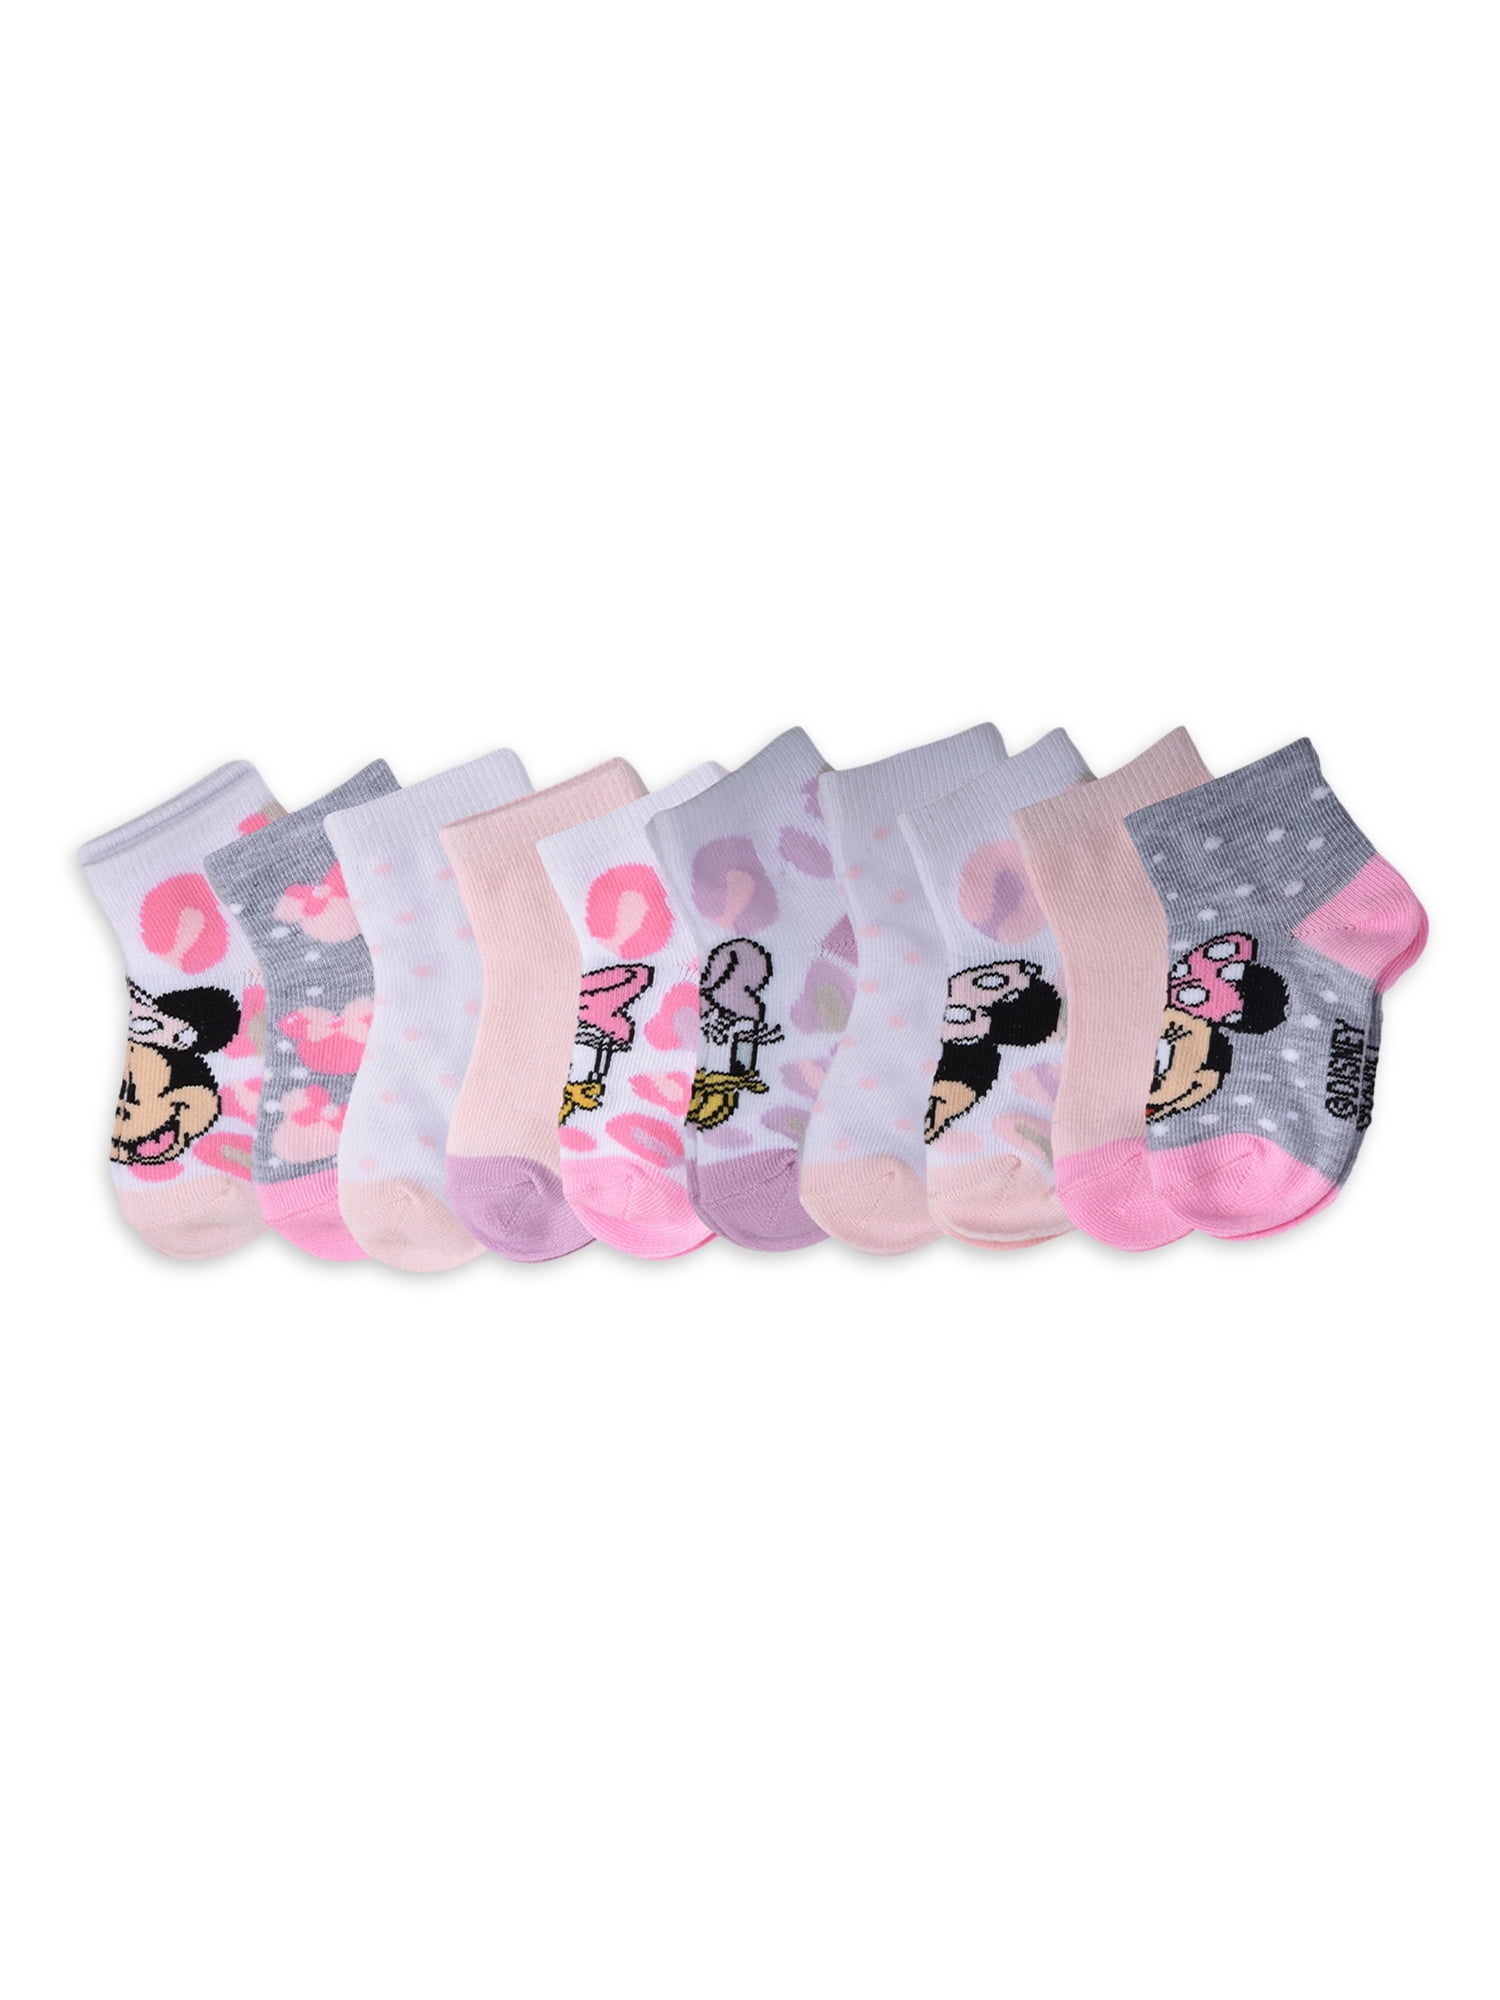 Minnie Mouse Toddler Girls' Panties, 6 pack Sizes 2T-4T 